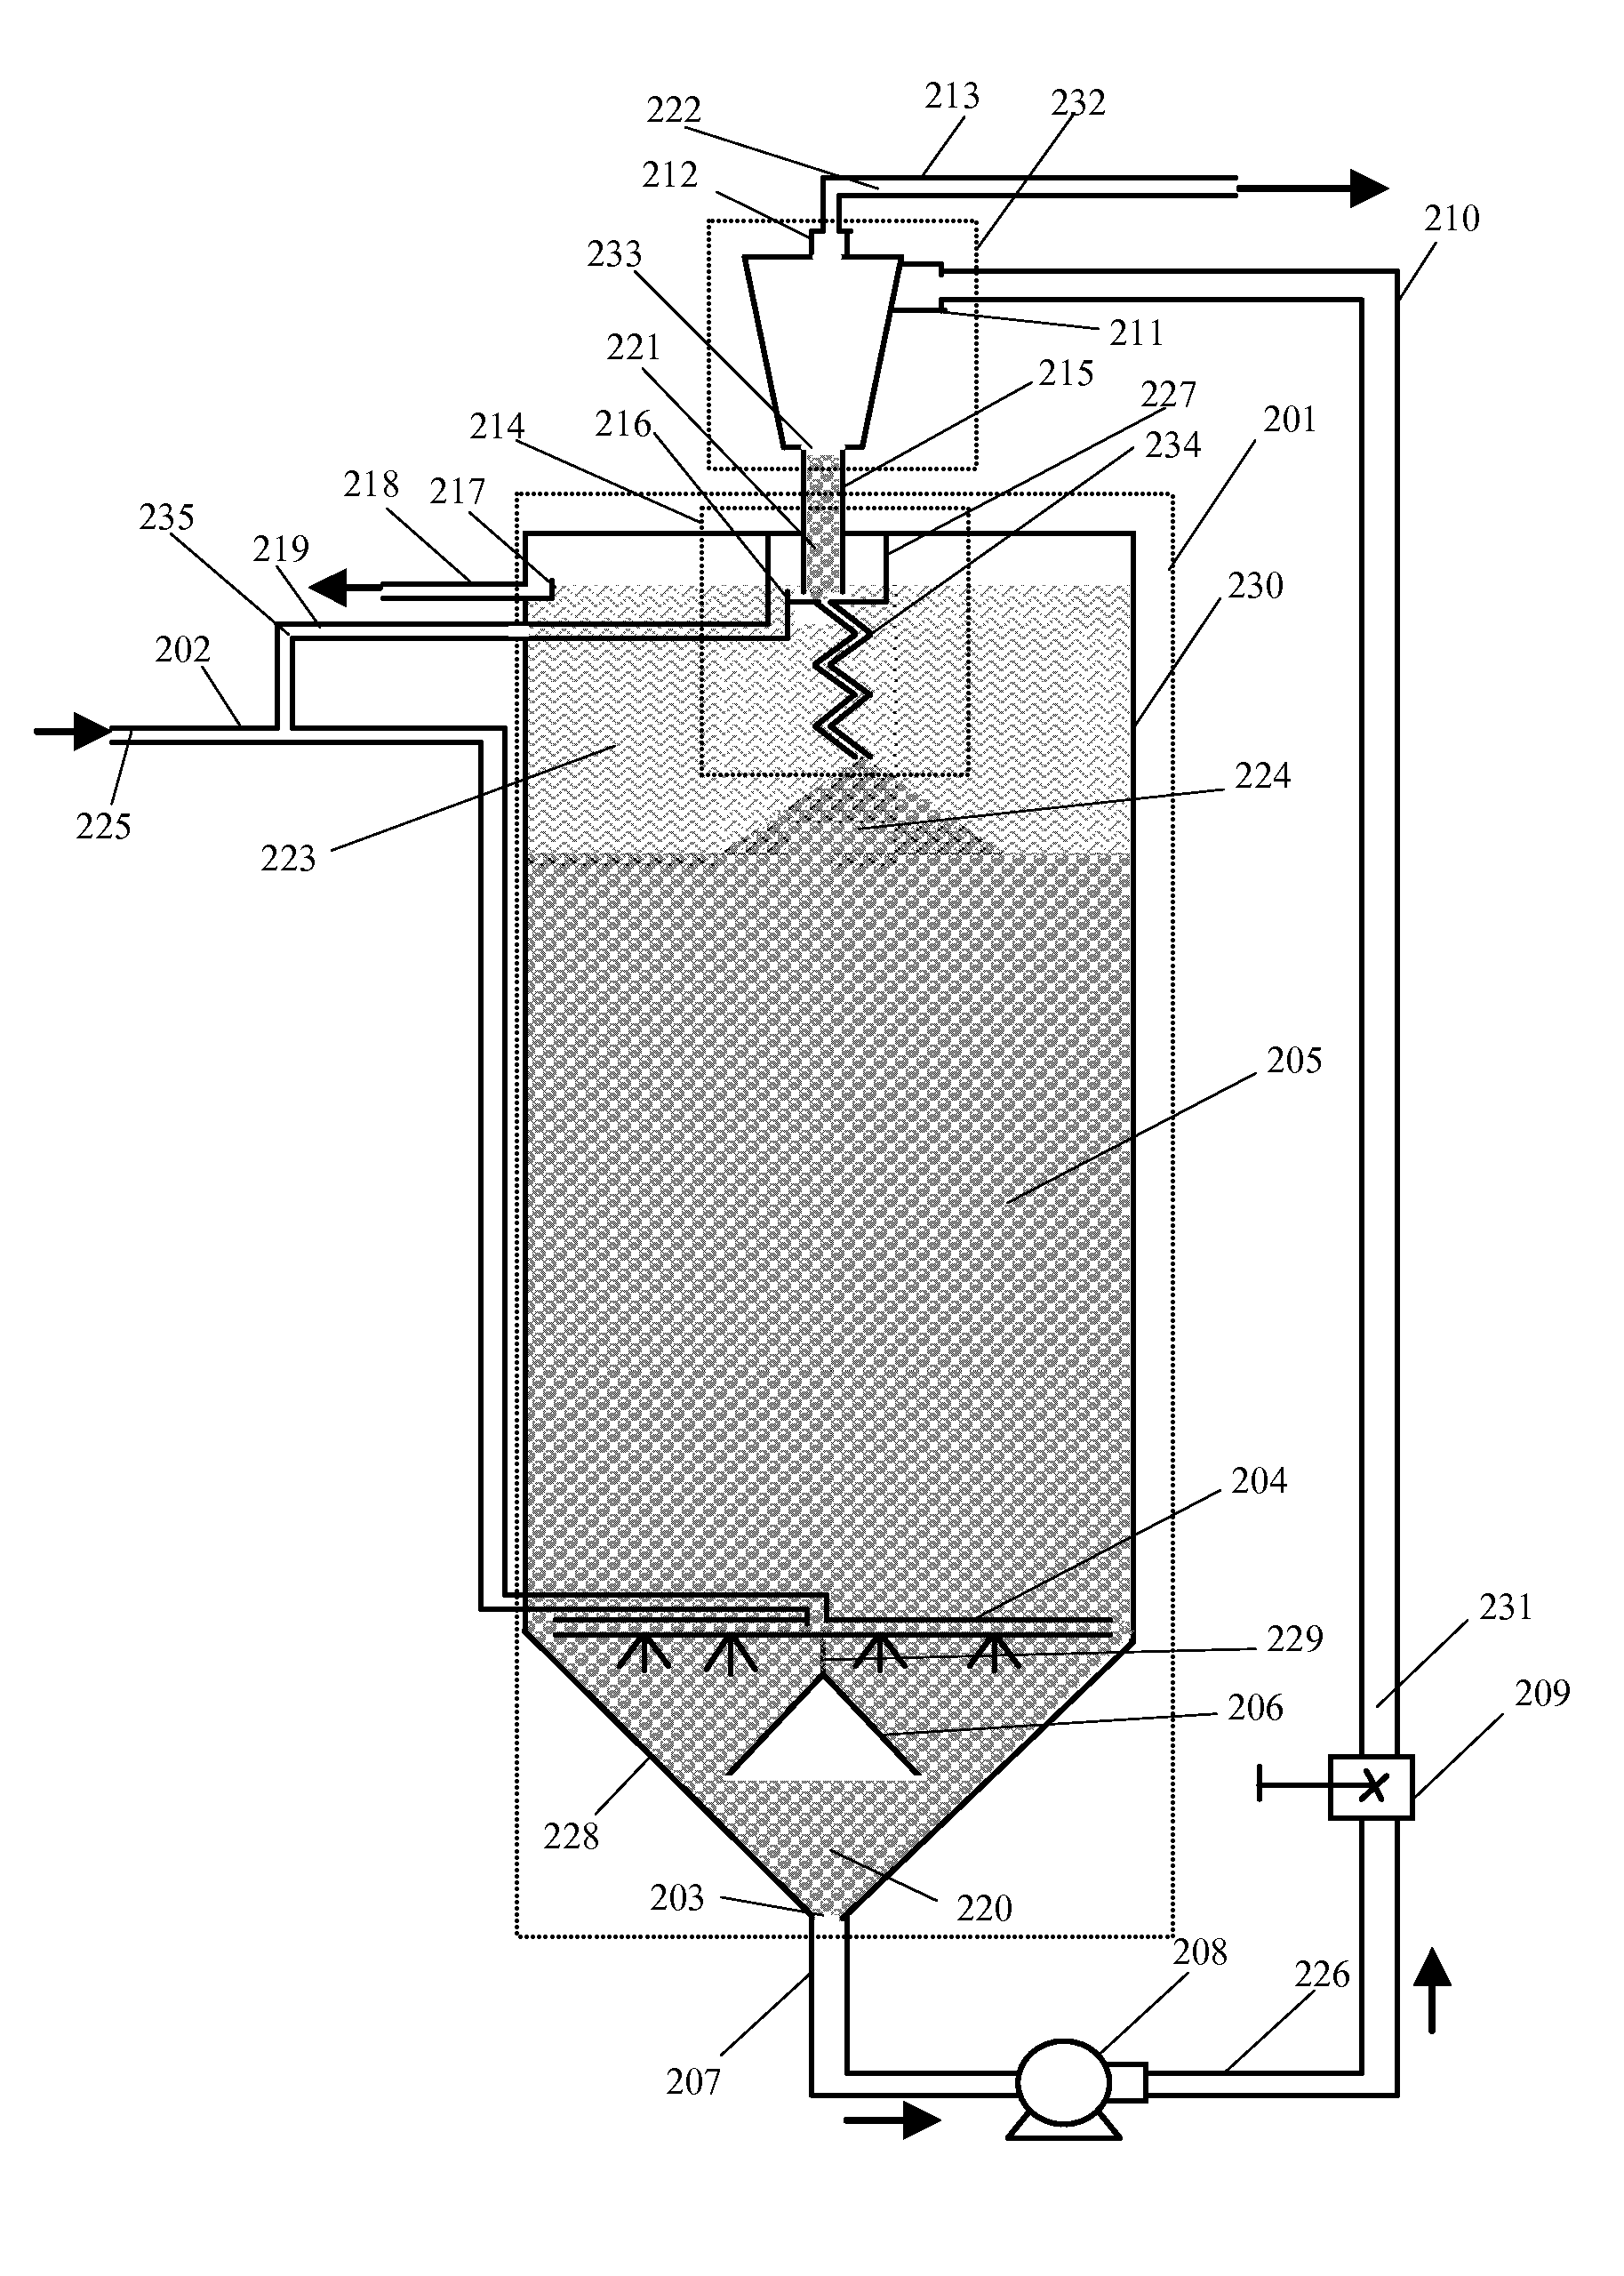 Method and Apparatus for Separation of Impurities from Liquid by Upflow Granular Media Filters